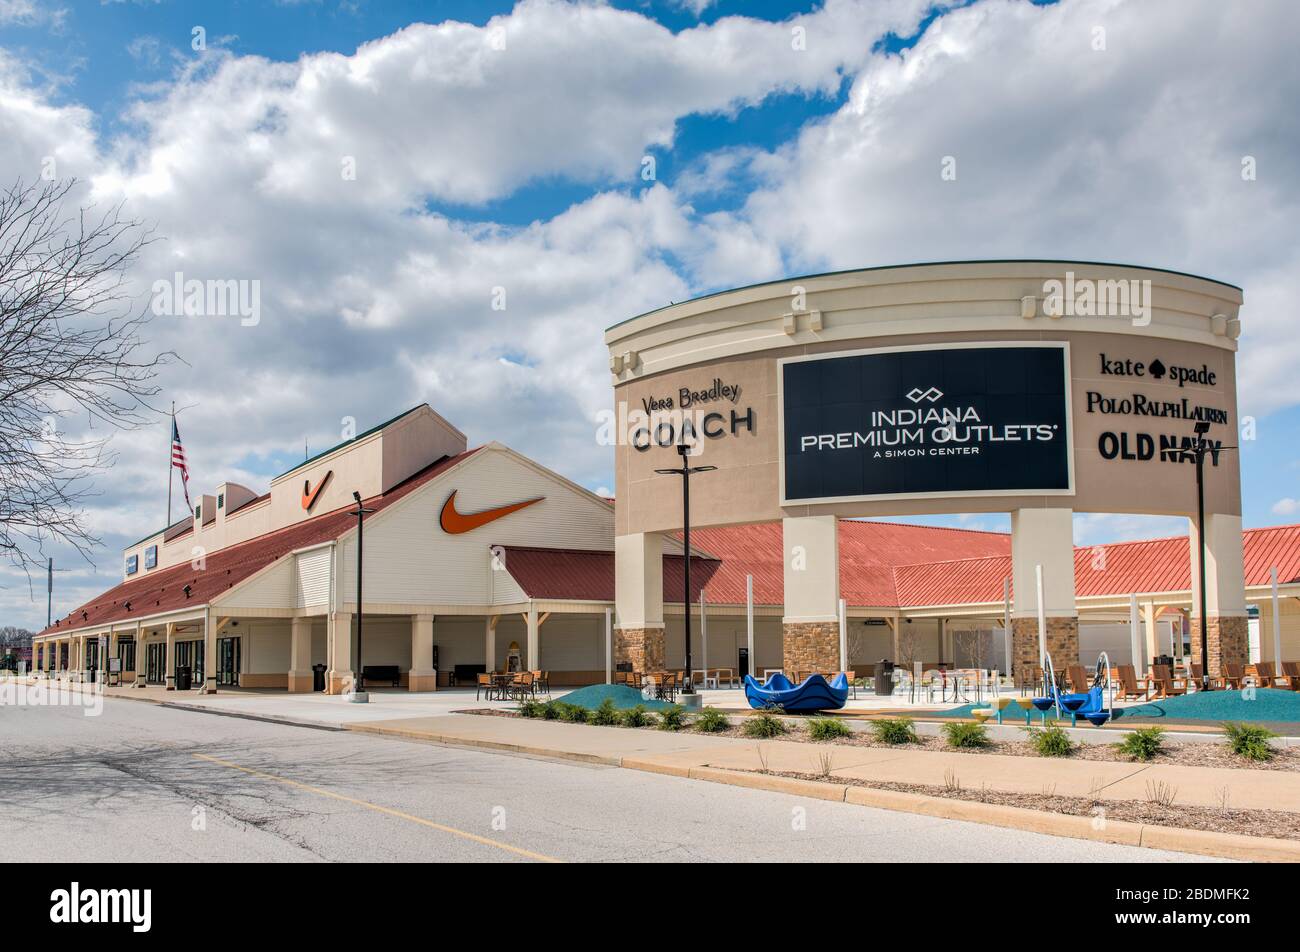 The abandoned Indiana Preumium Outlets mall in Edinburgh, Indiana Stock  Photo - Alamy